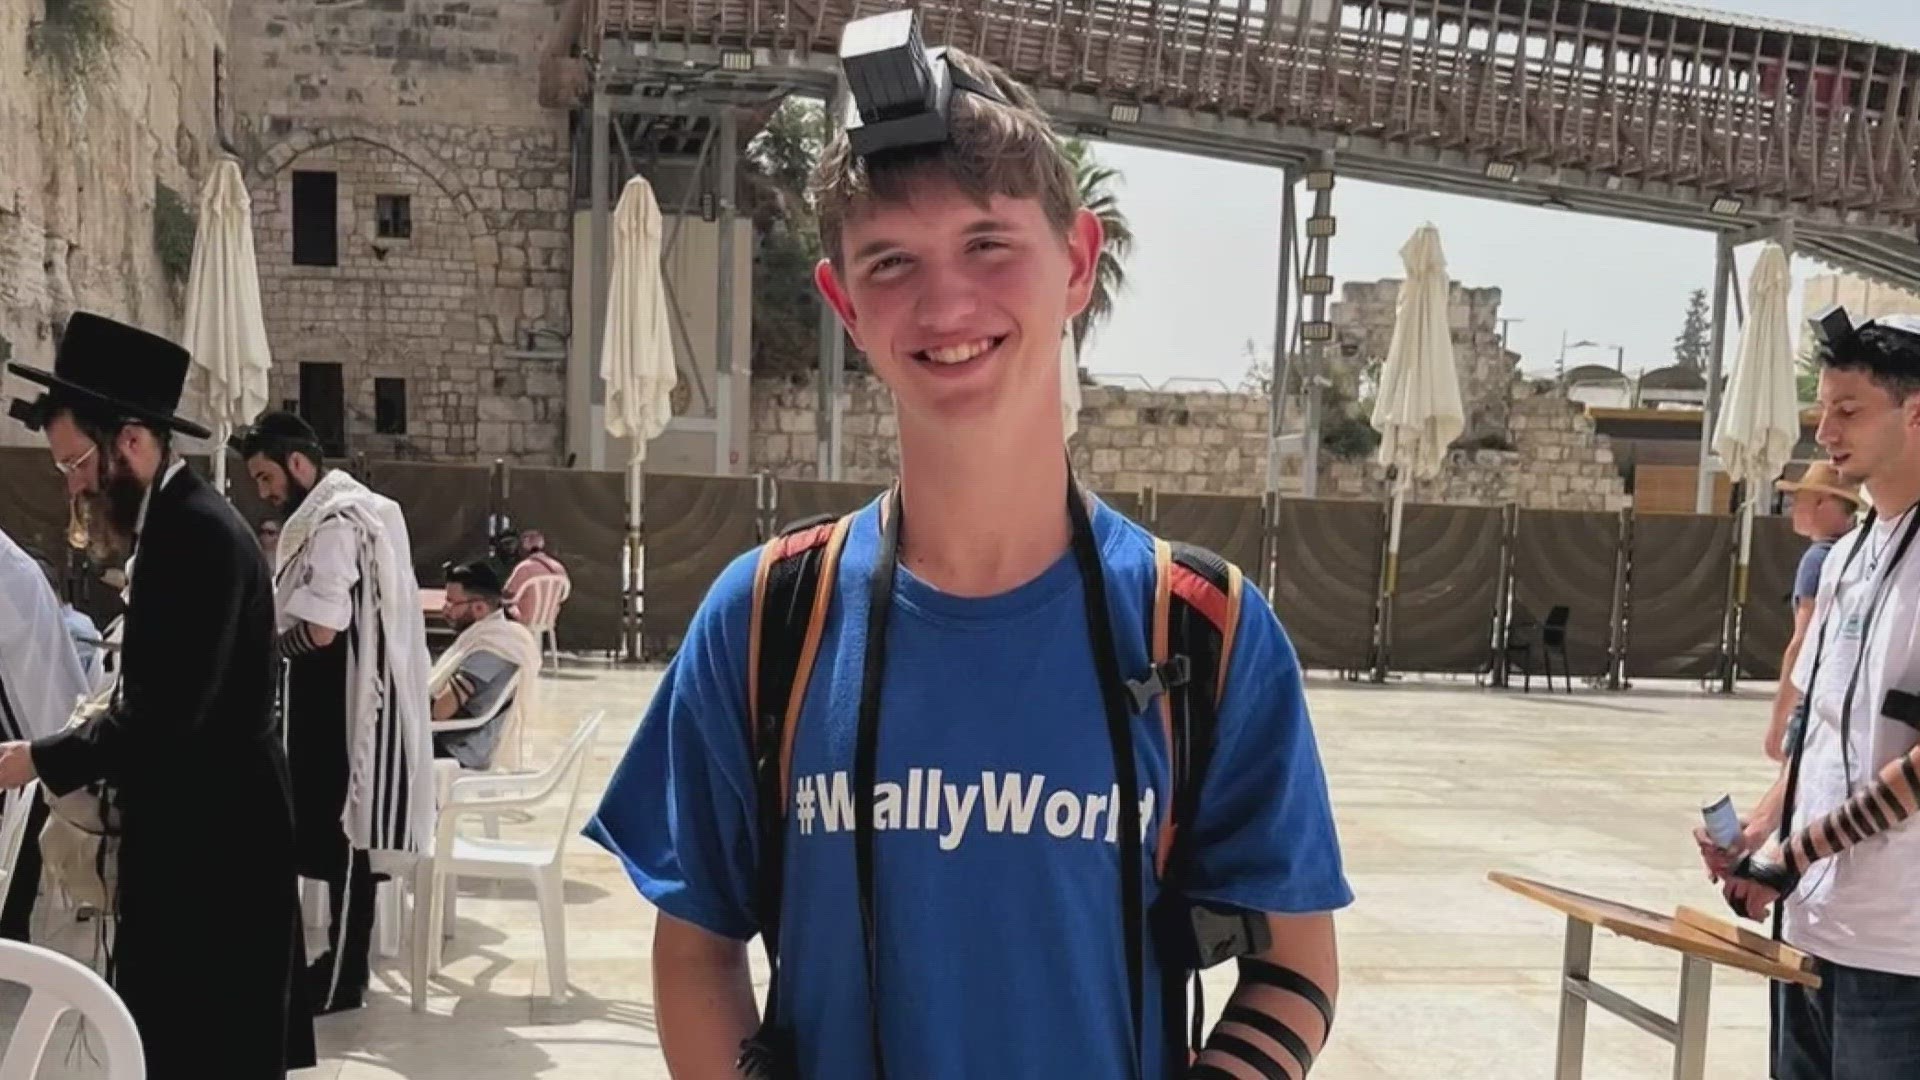 Donovan Ahlquist moved to Israel in August for a gap year after graduating high school from Willow.